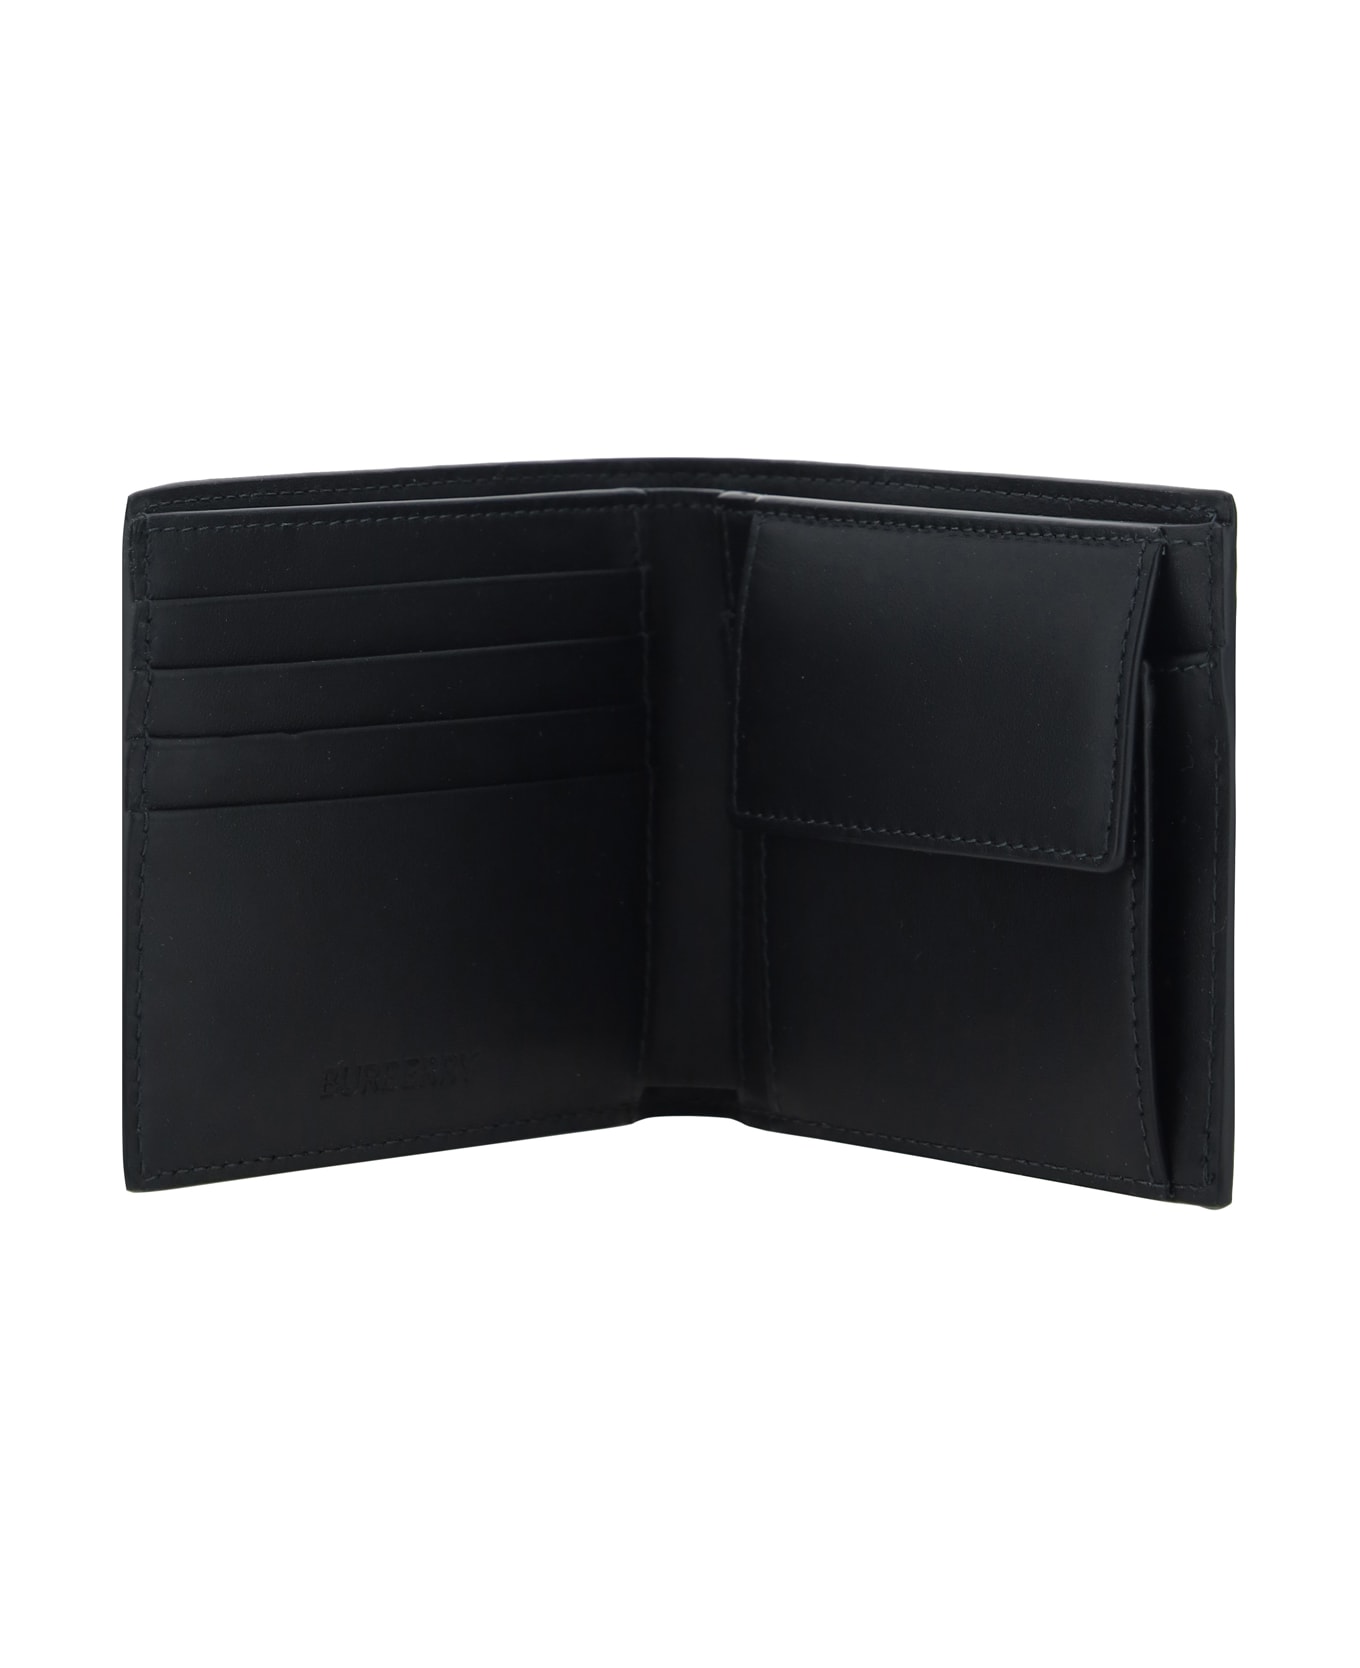 Burberry Wallet - Charcoal